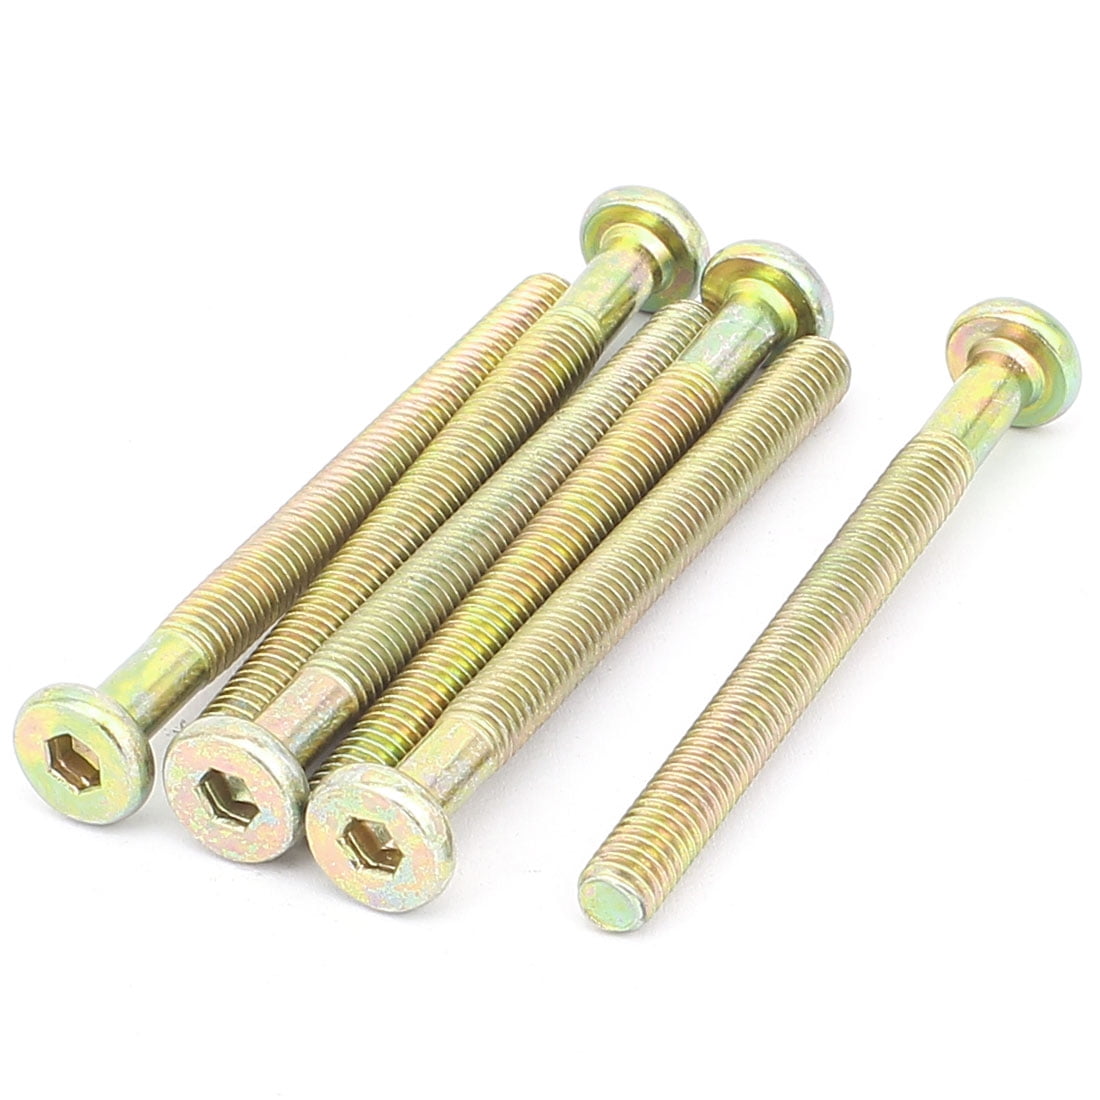 4 x M6 Furniture Cot & Bed Allen Headed Bolts Hex Slotted Barrel Nuts 60 100mm 